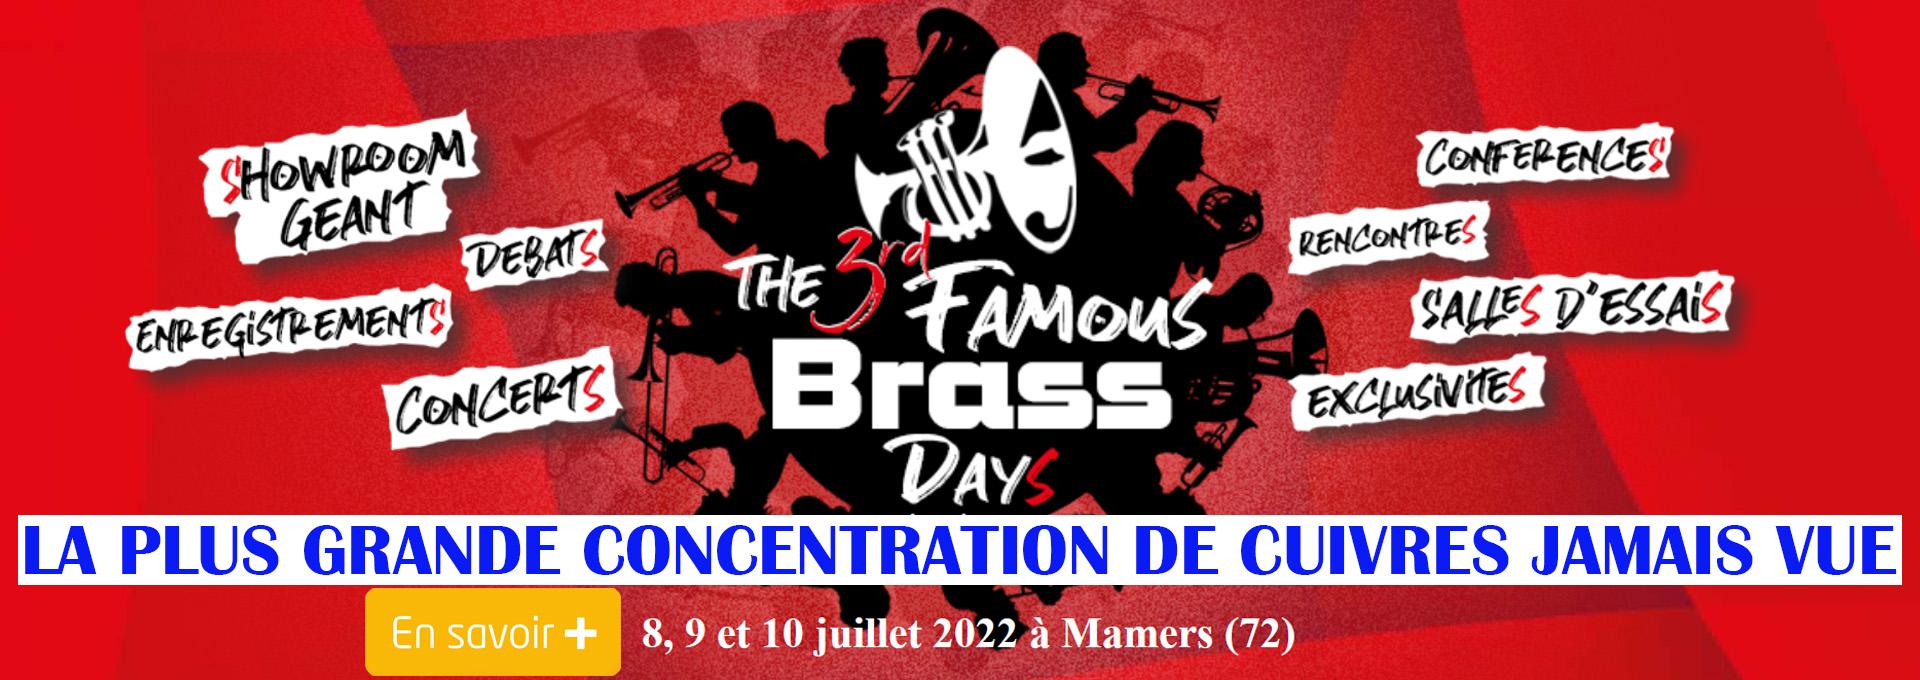 FAMOUS BRASS DAY